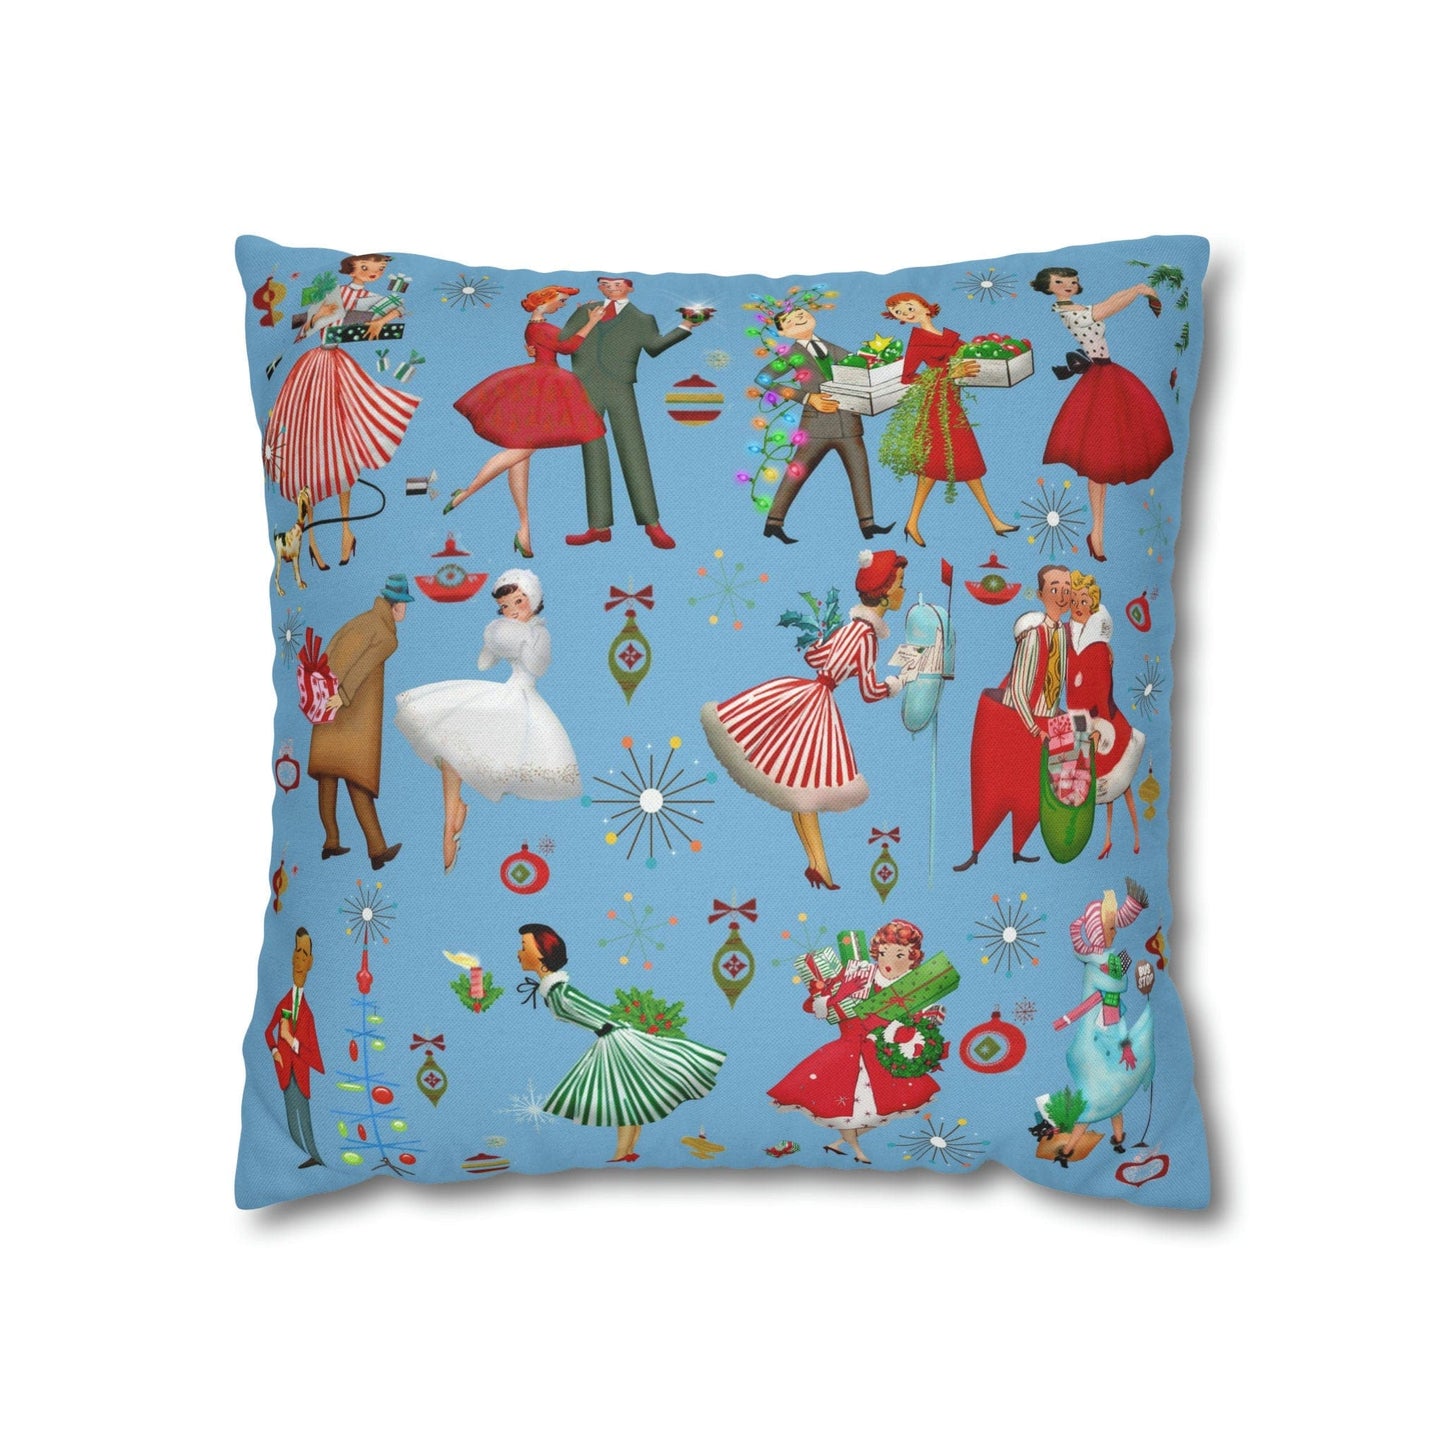 Kate McEnroe New York Retro Vintage 1950s Kitsch Christmas Throw Pillow Cover, Vintage Housewives, Couples Xmas Card Inspired Art, MCM Holiday Decor Throw Pillow Covers